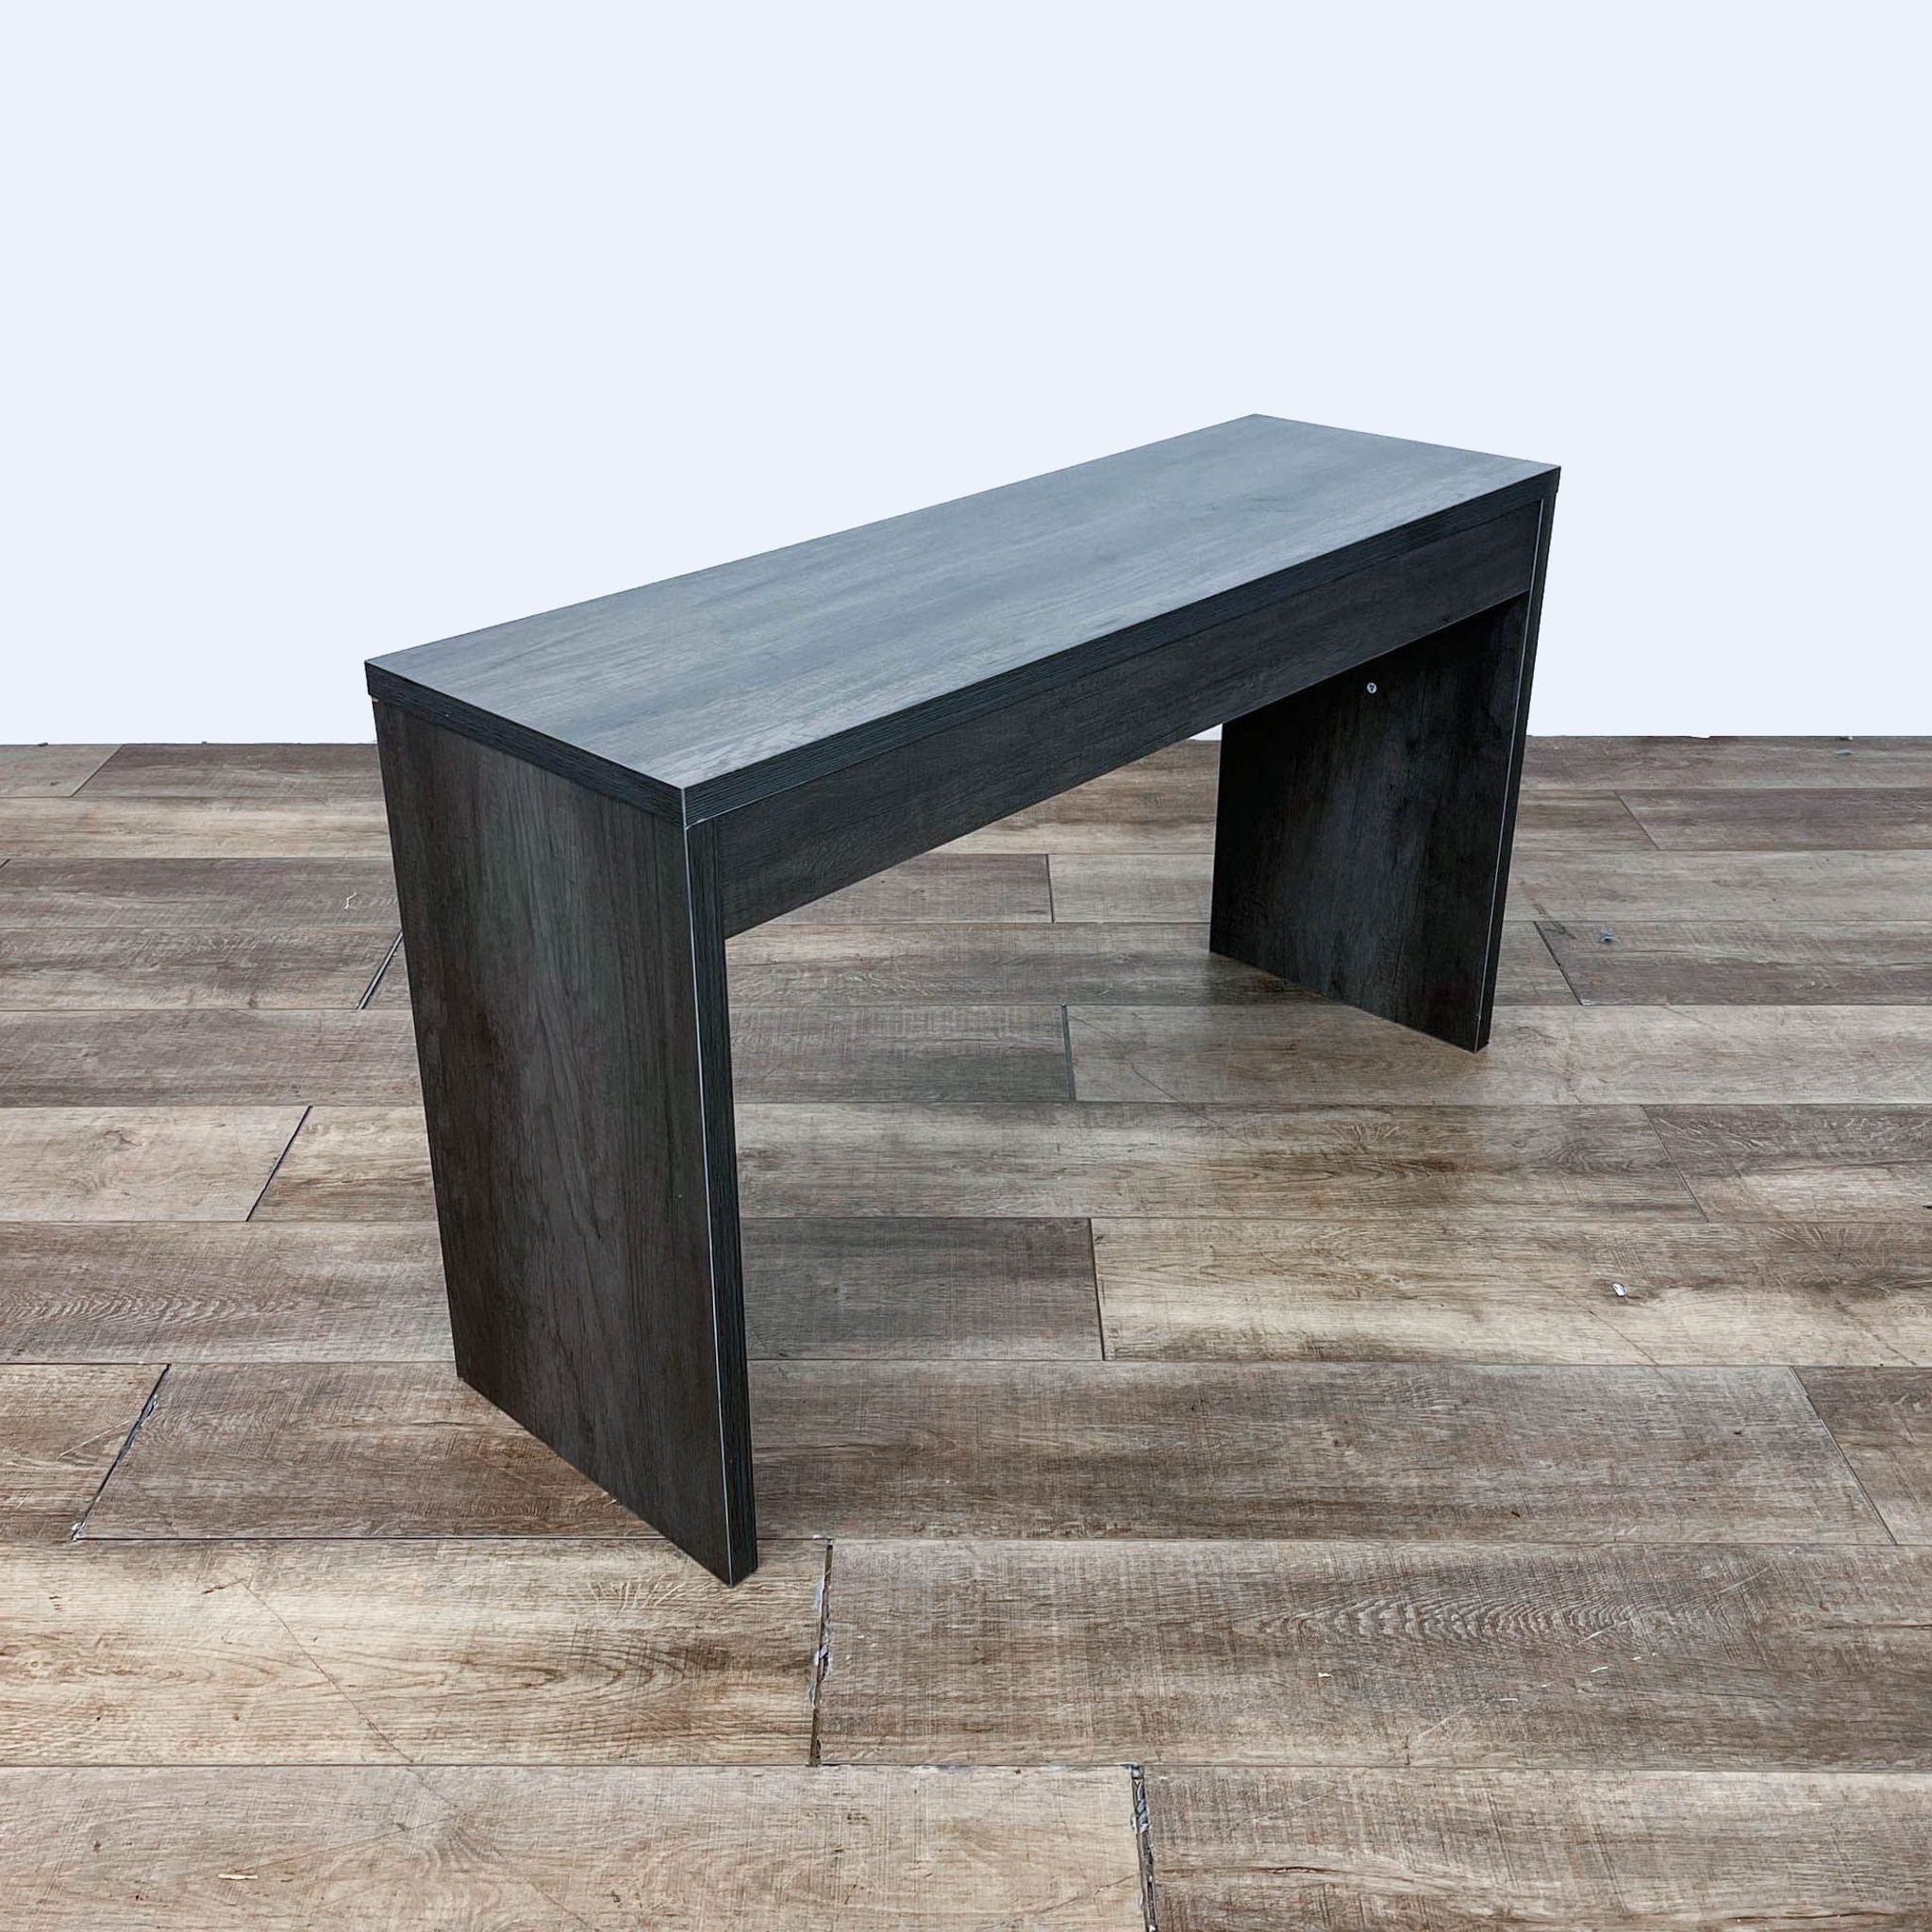 Angled view of a modern Reperch console table with a dark finish, highlighting the simplicity of its form and structure.